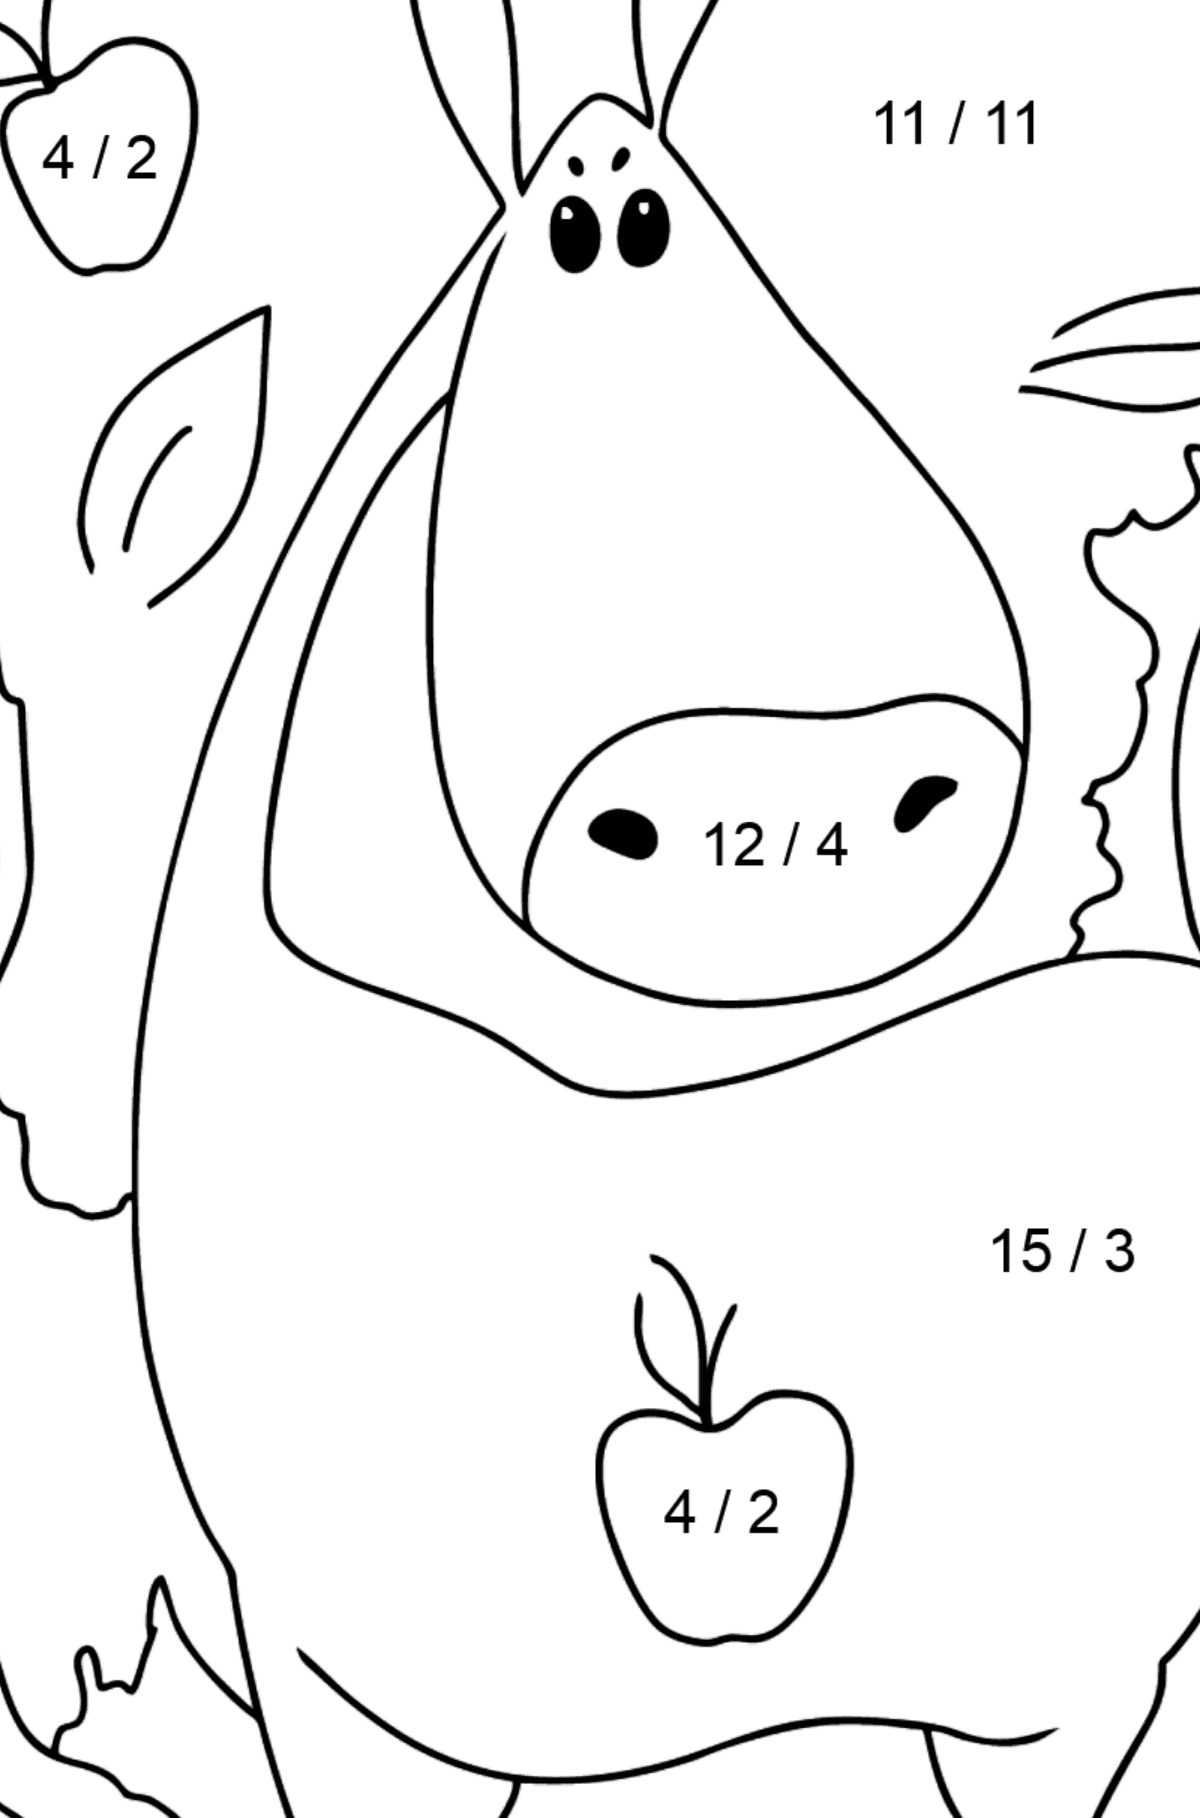 Coloring page cute horse (easy) - Math Coloring - Division for Kids